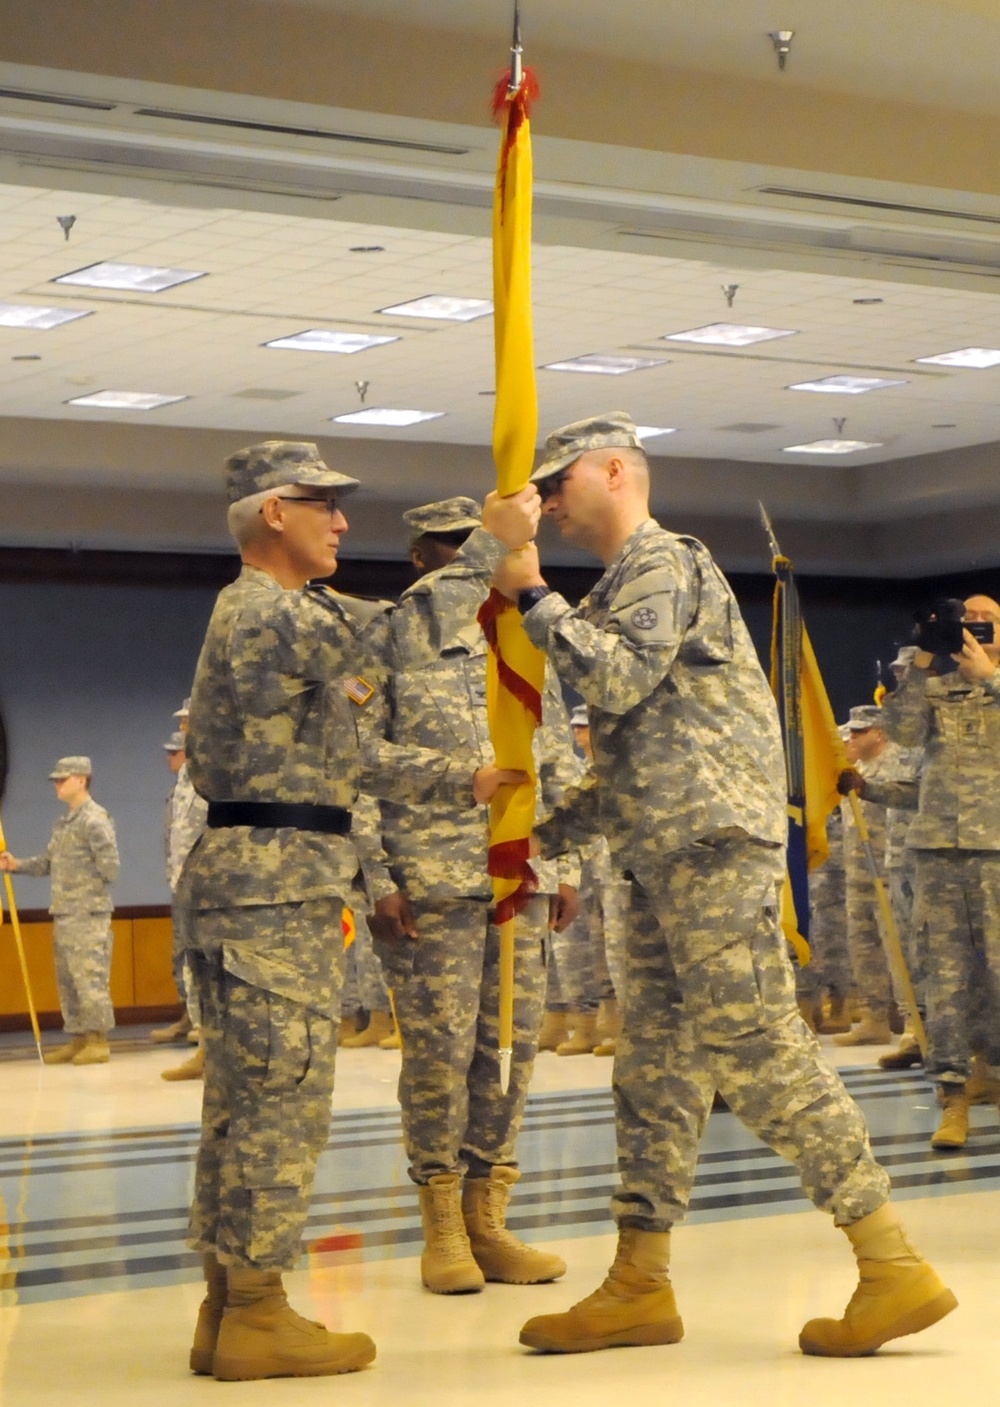 310th ESC Command officially changes hands